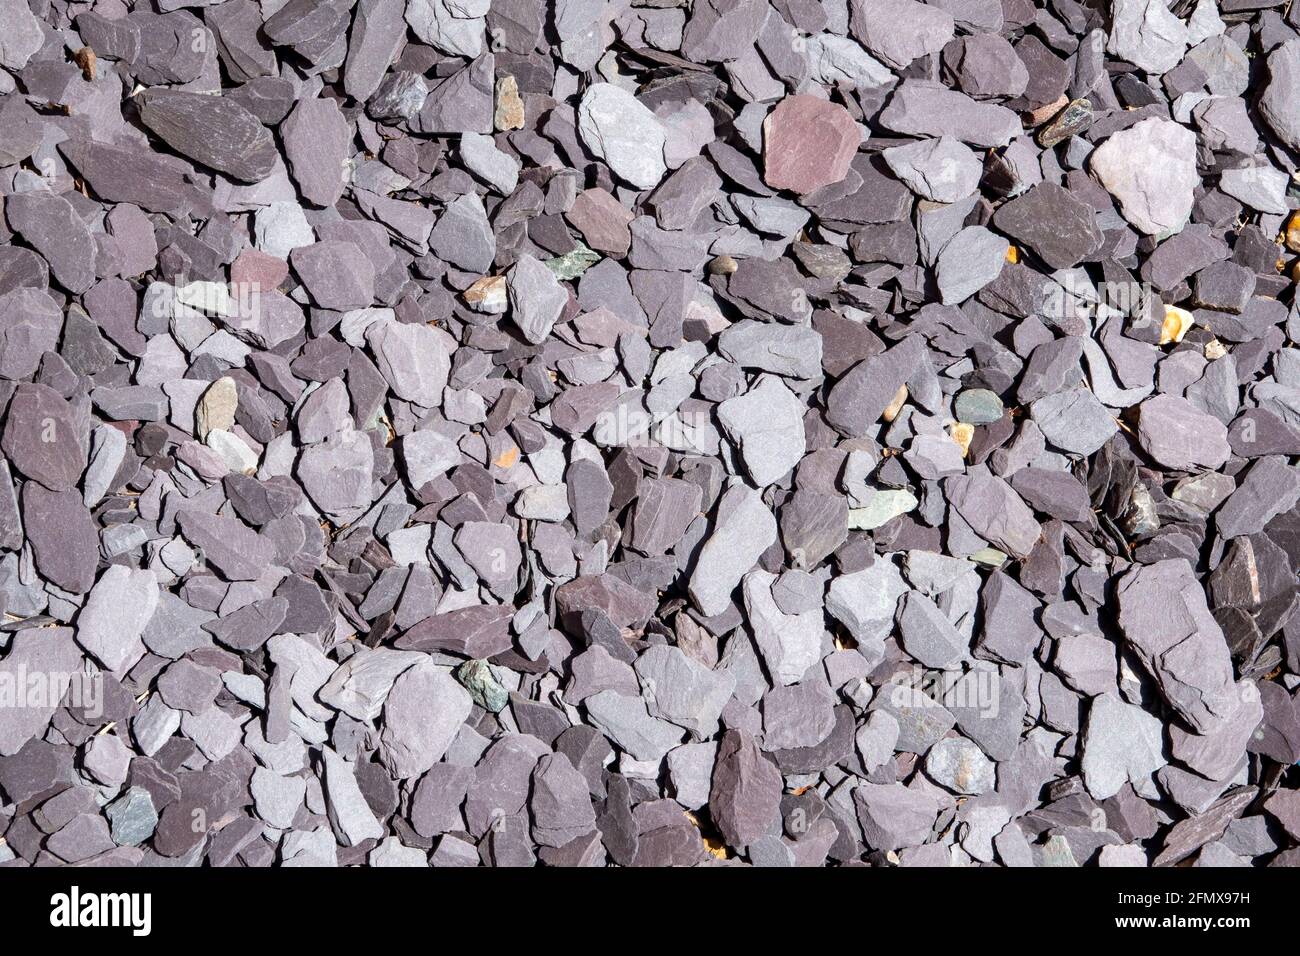 Close up area of slate chippings forming background texture Stock Photo